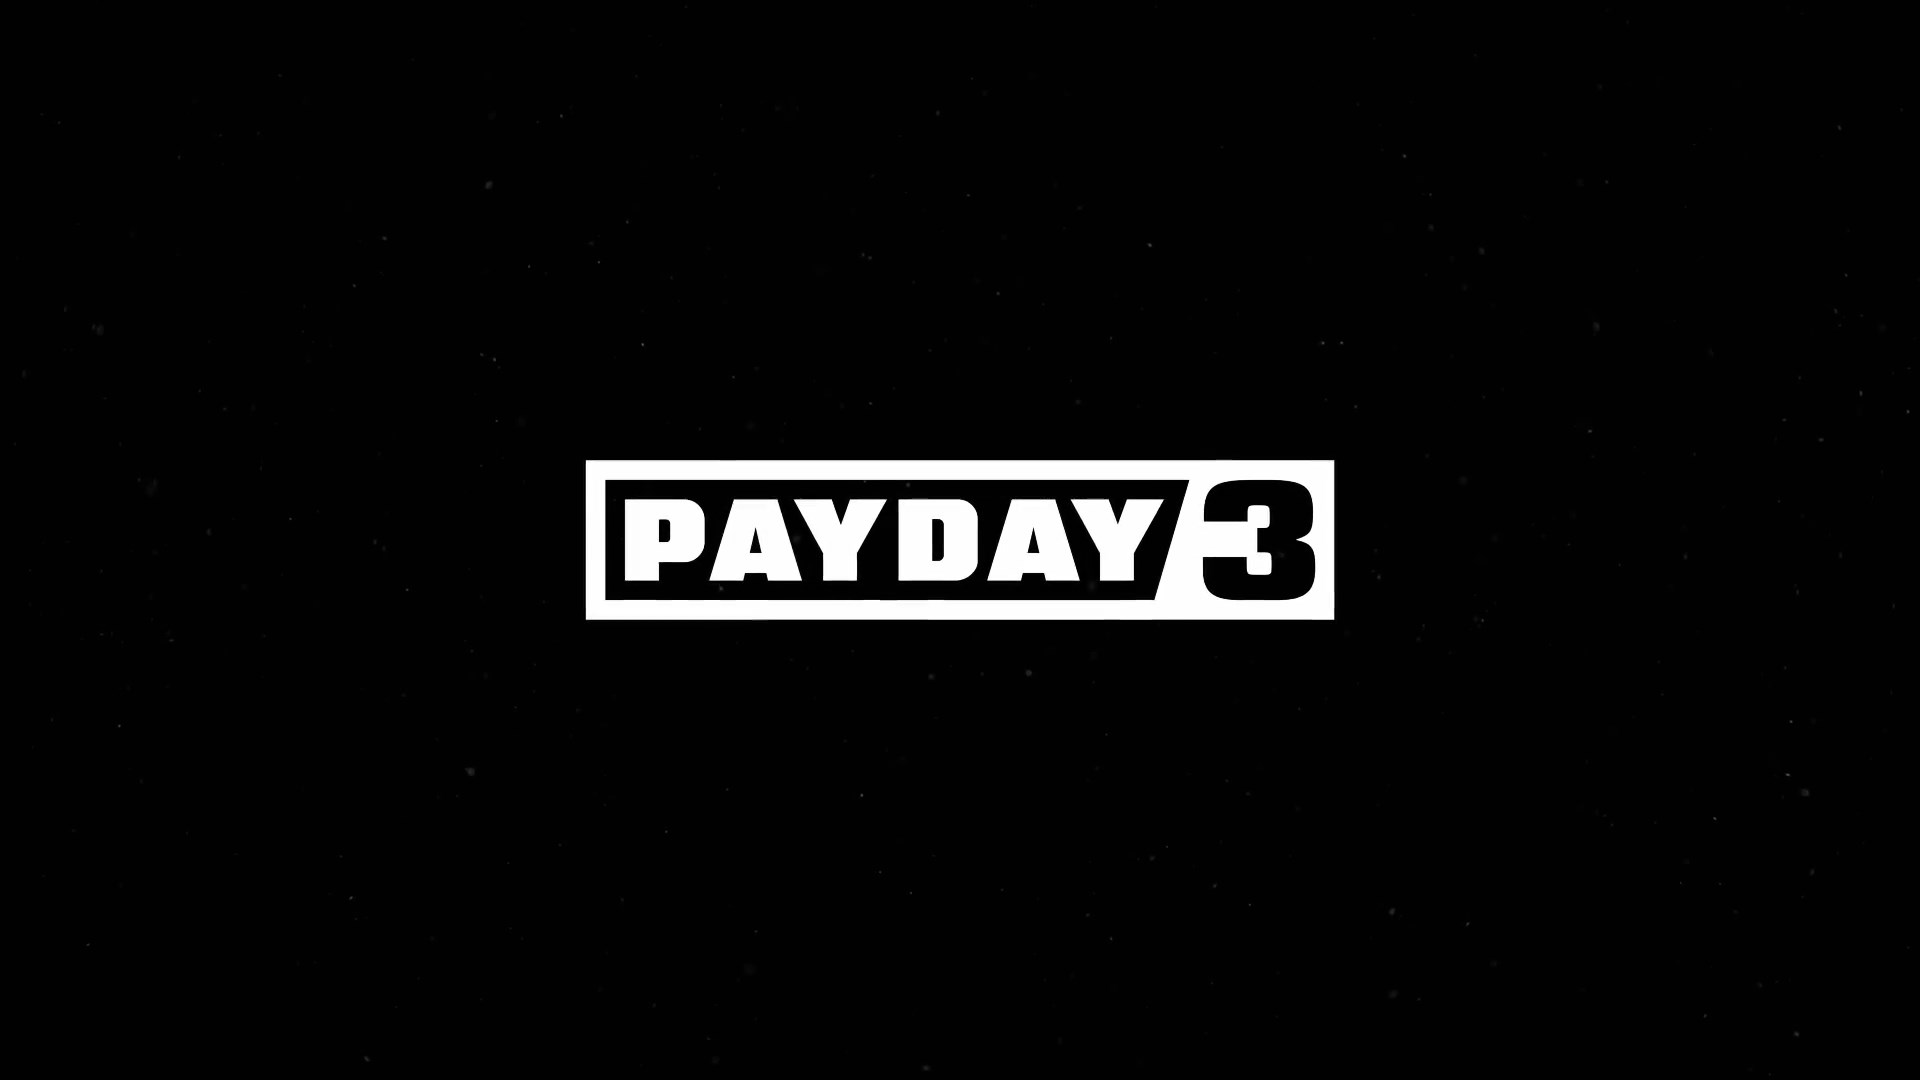 Payday 3: Release date, platforms, gameplay, story, trailers, more